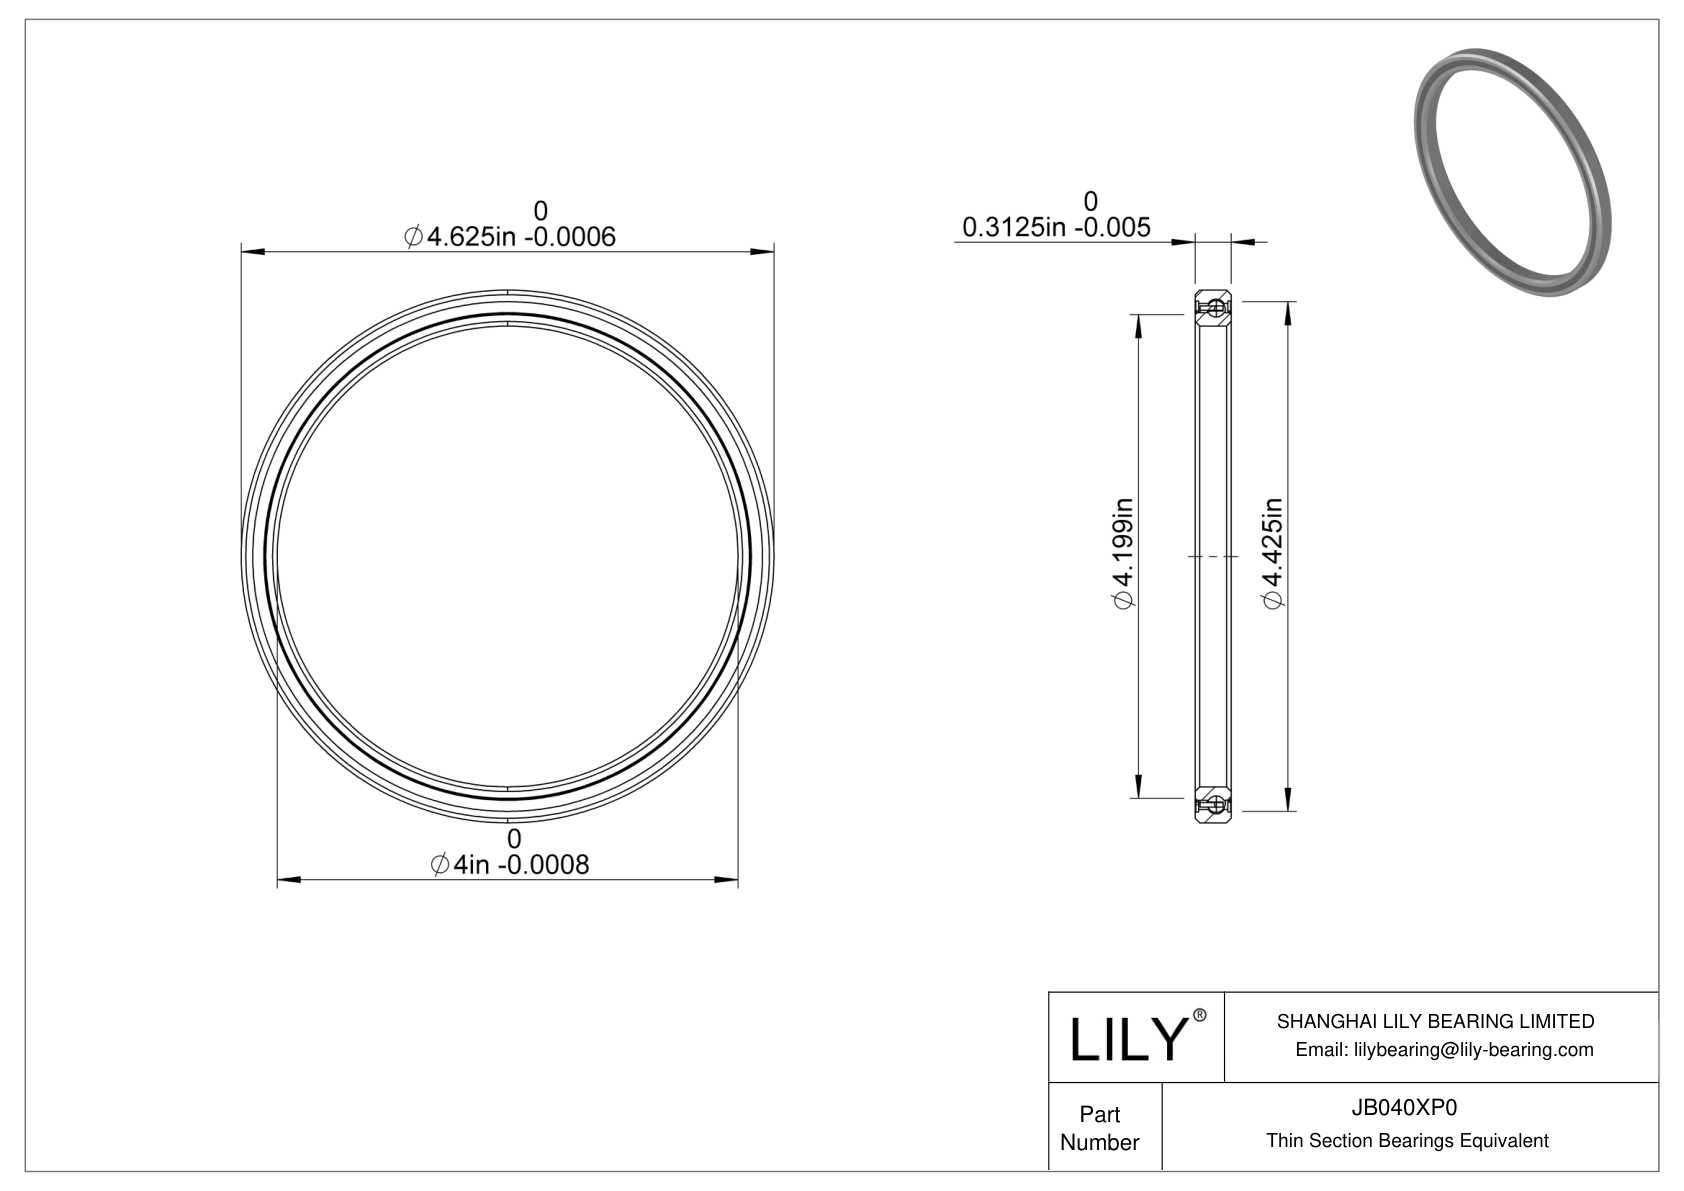 WB040XP0 Constant Section (CS) Bearings cad drawing